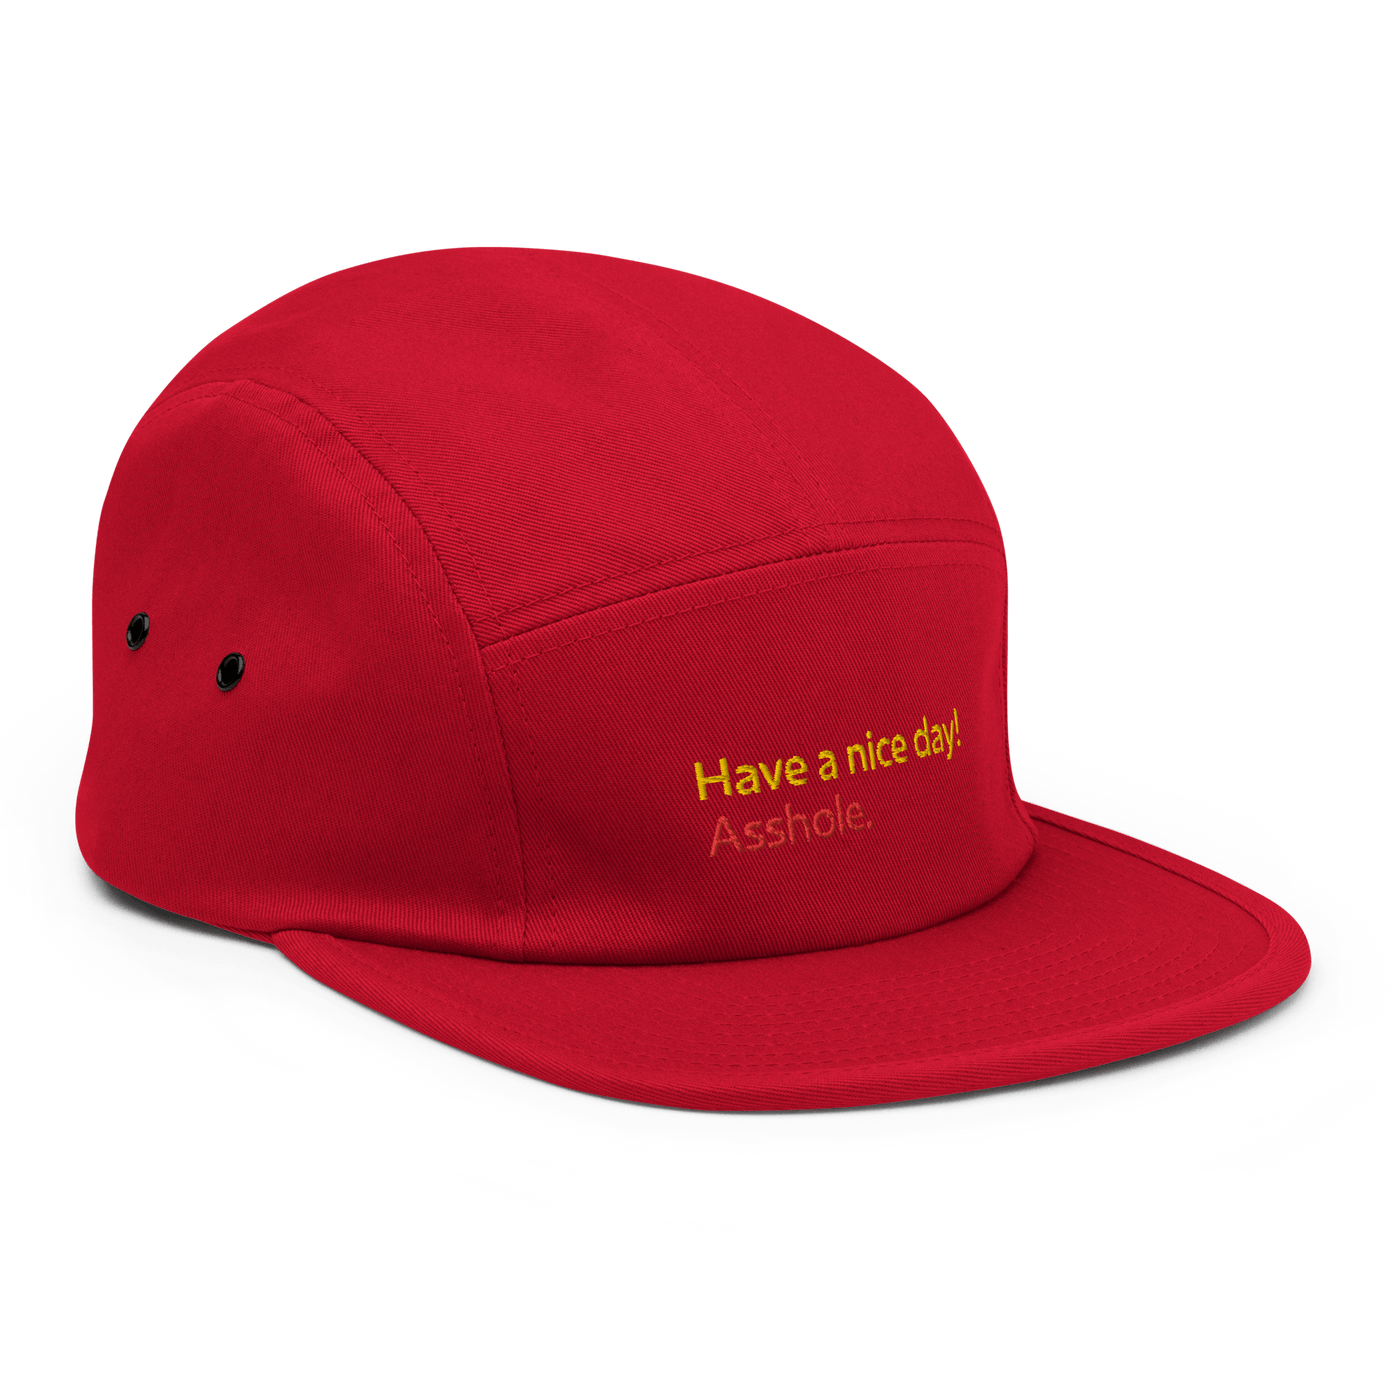 Have a nice day! (asshole) Five Panel Cap - Red - - Just Another Cap Store